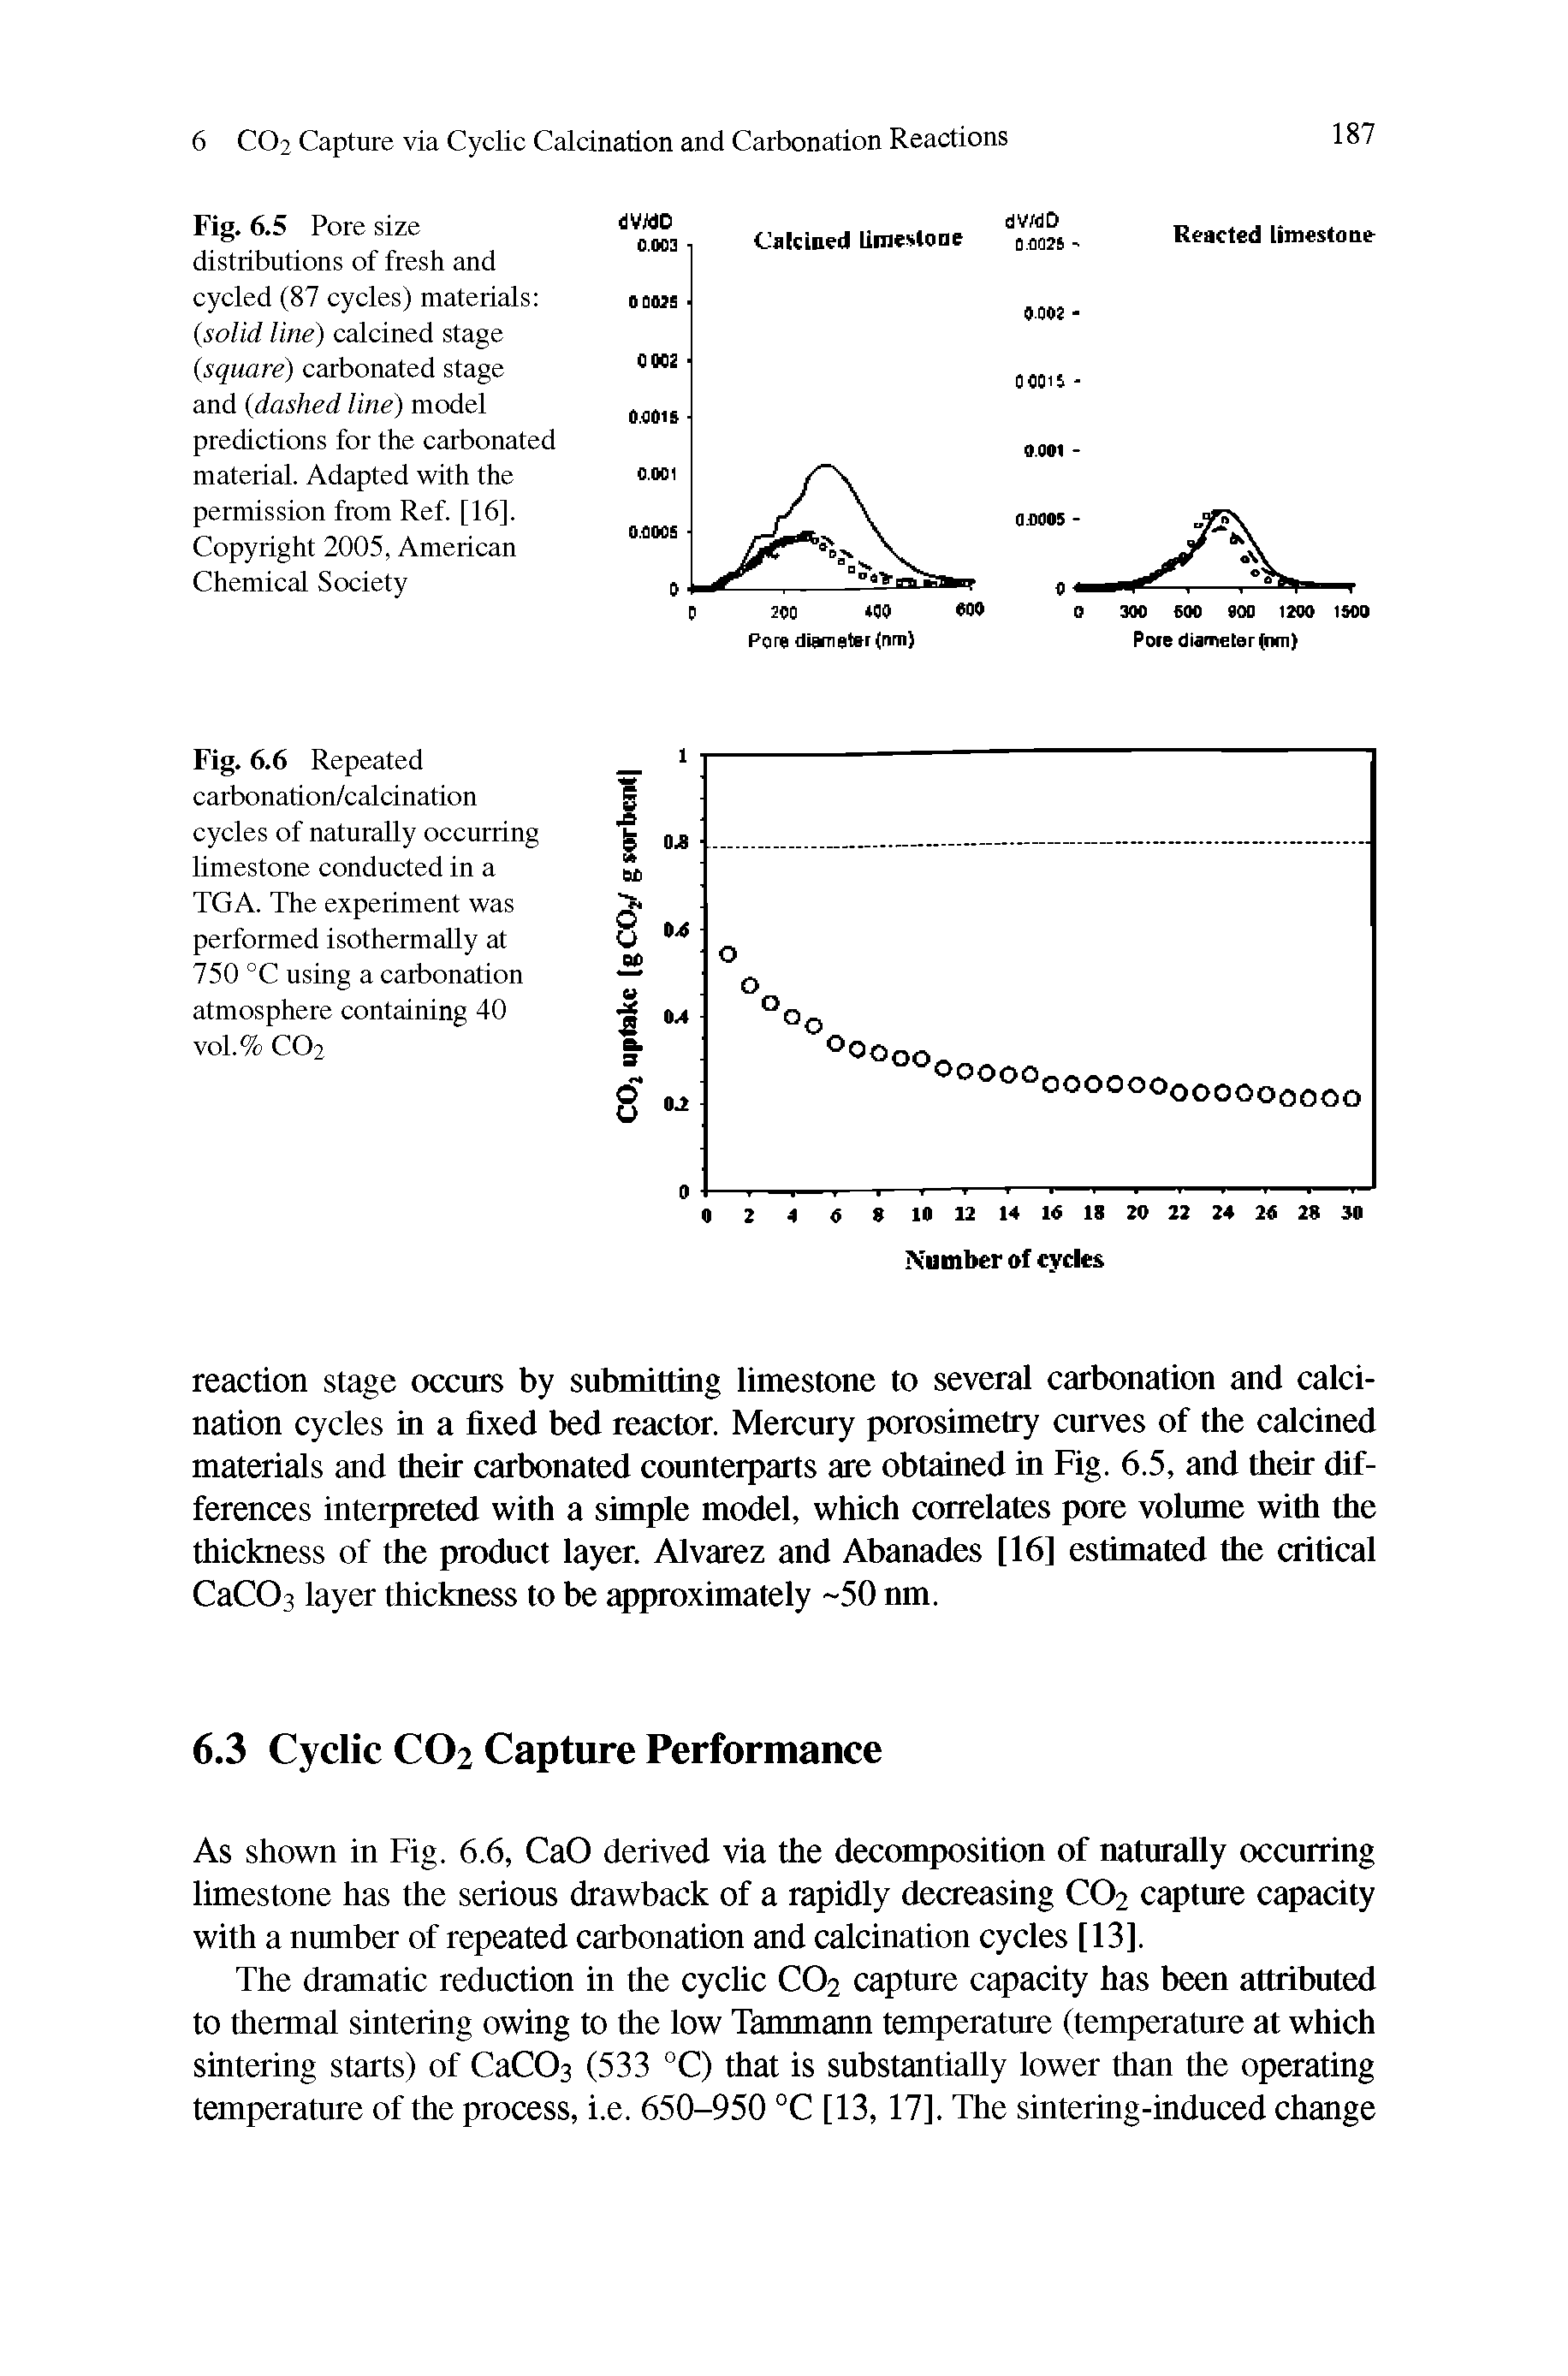 Fig. 6.5 Pore size distributions of fresh and cycled (87 cycles) materials (solid line) calcined stage (square) carbonated stage and (dashed line) model predictions for the carbonated material. Adapted with the permission from Ref. [16]. Copyright 2005, American Chemical Society...